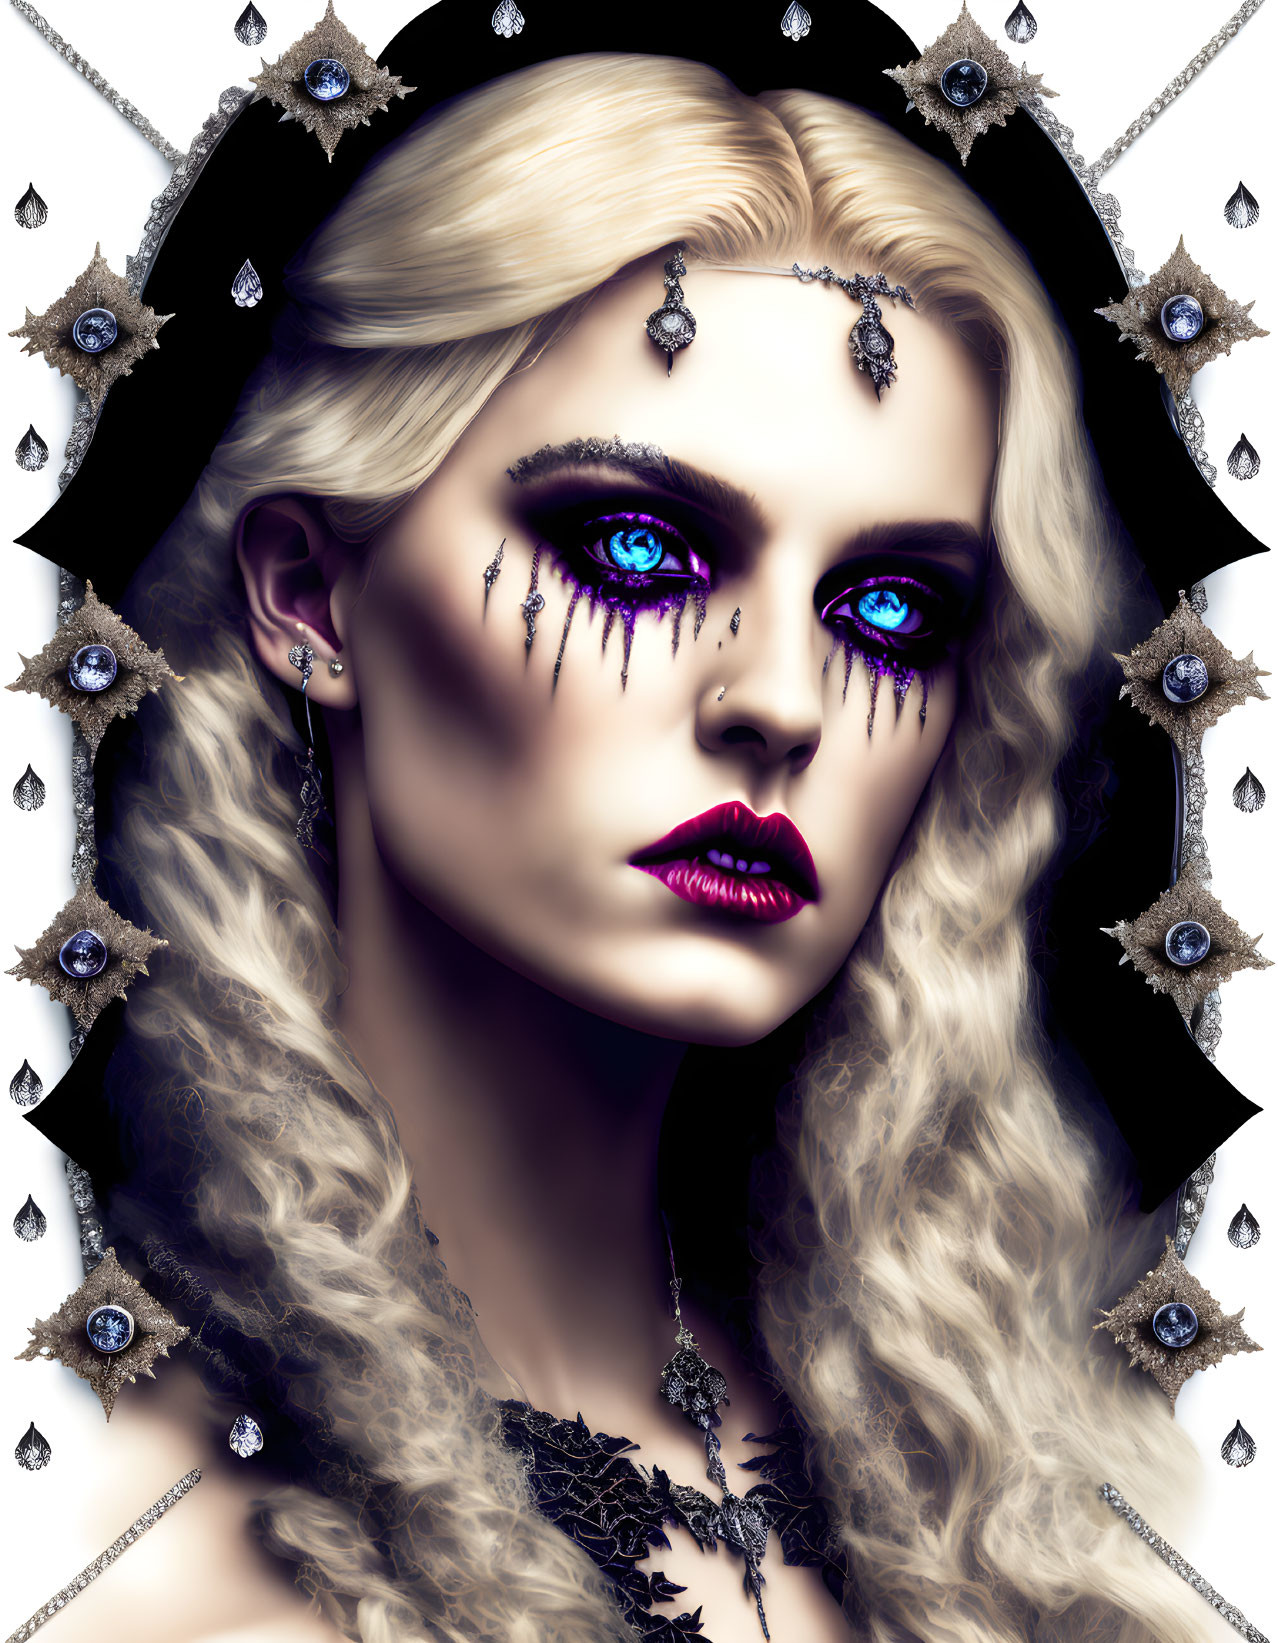 Woman with Striking Blue Eyes and Dark Lipstick Adorned with Glittering Jewels